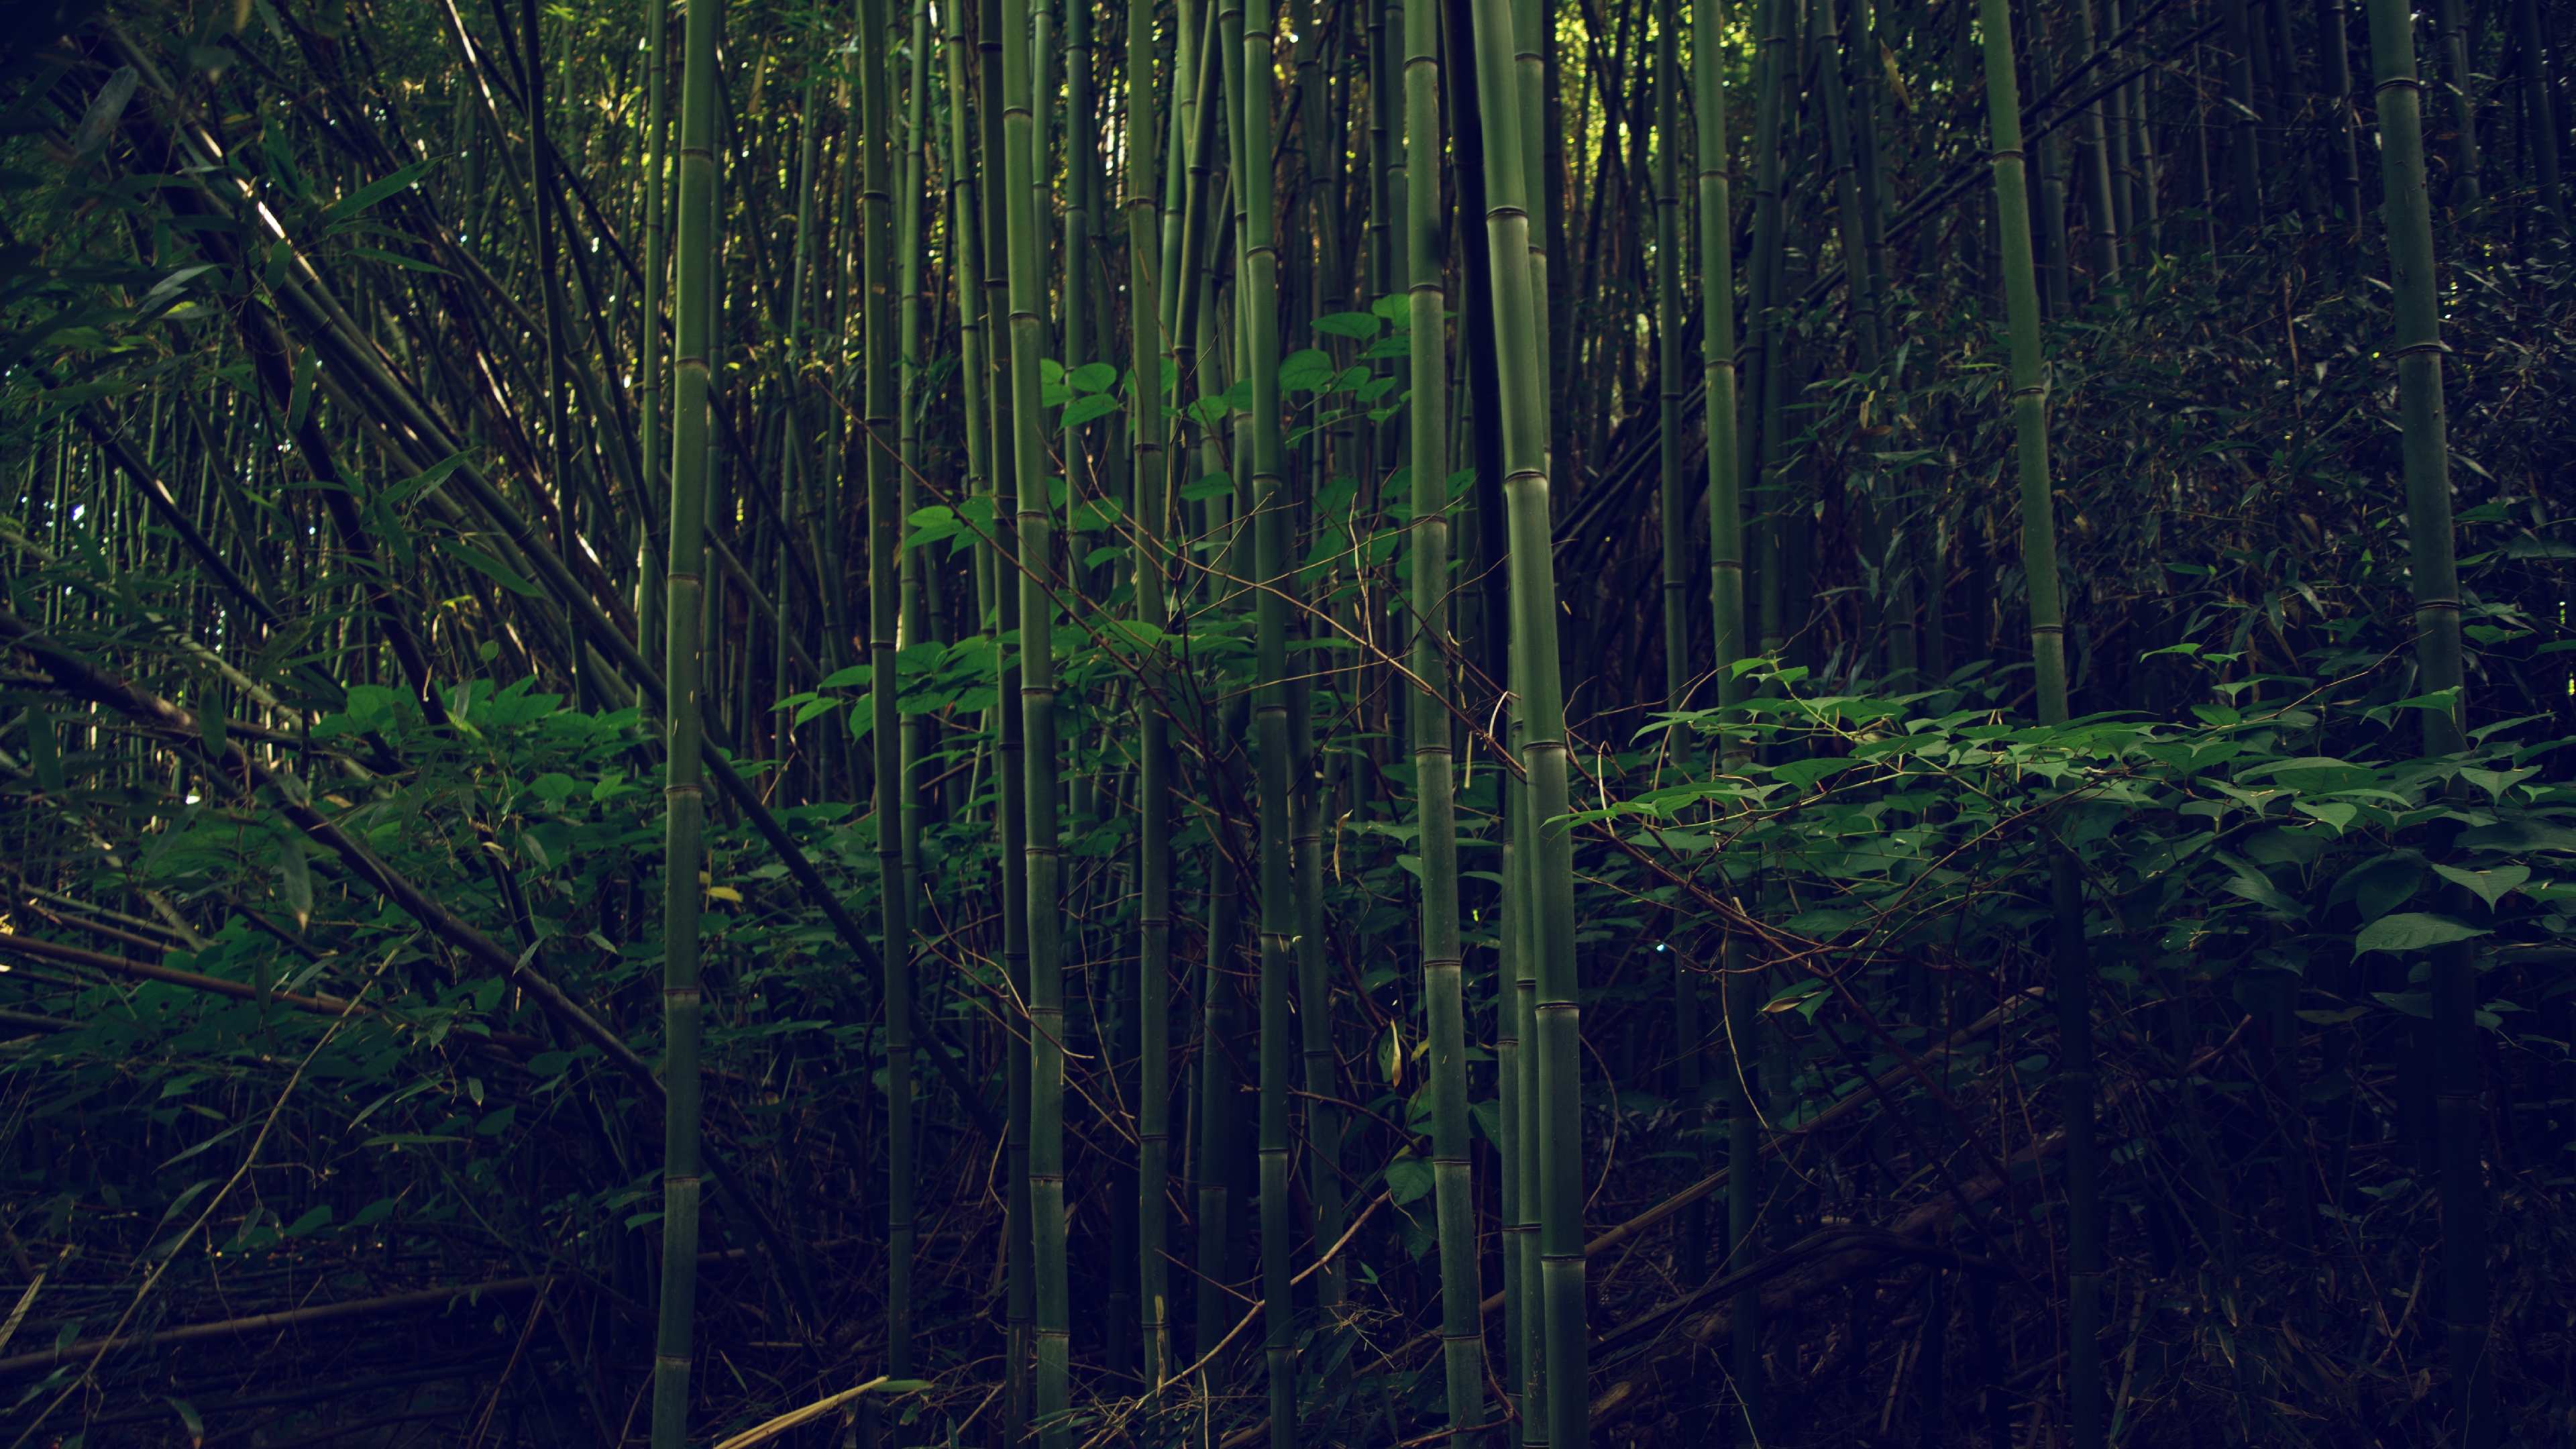 Wallpapers nature forest wallpaper bamboo on the desktop